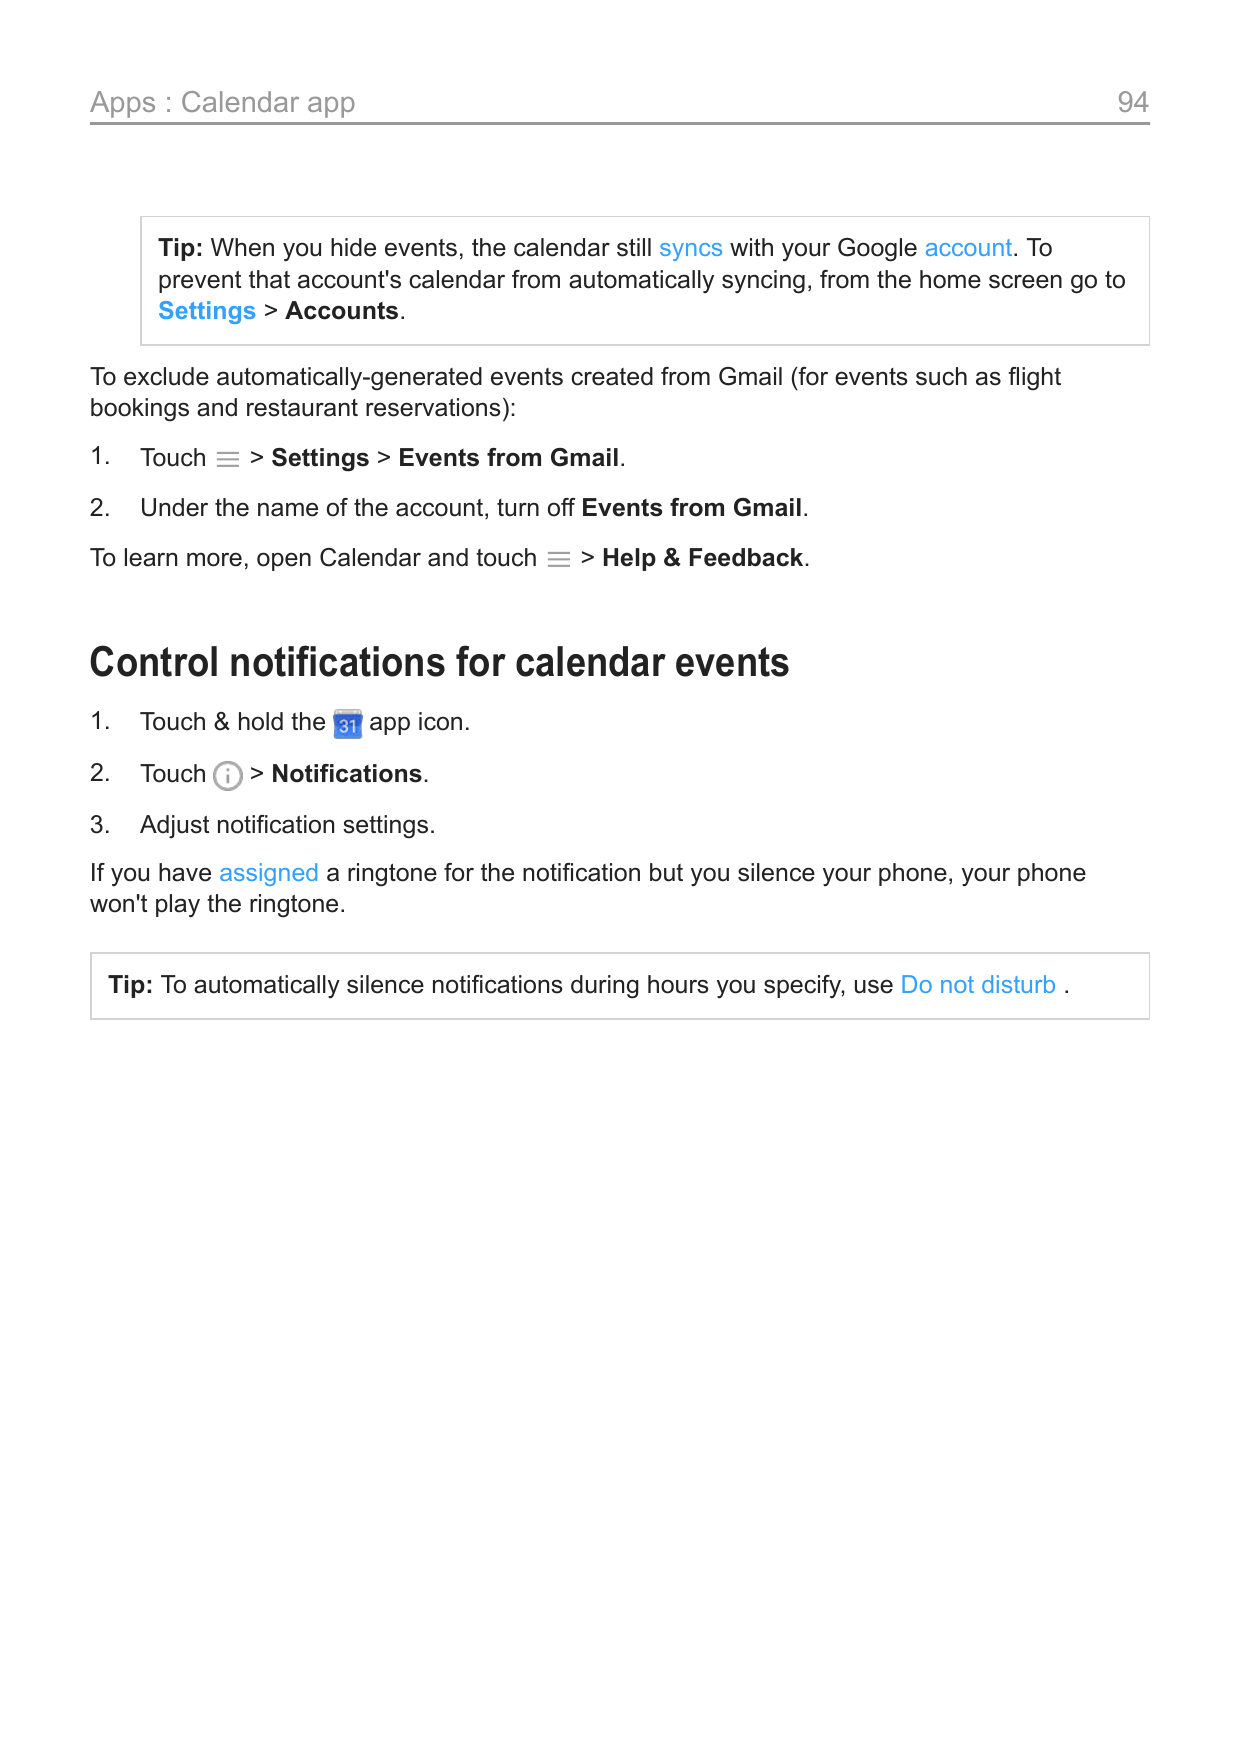 Apps : Calendar app94Tip: When you hide events, the calendar still syncs with your Google account. Toprevent that account's cale